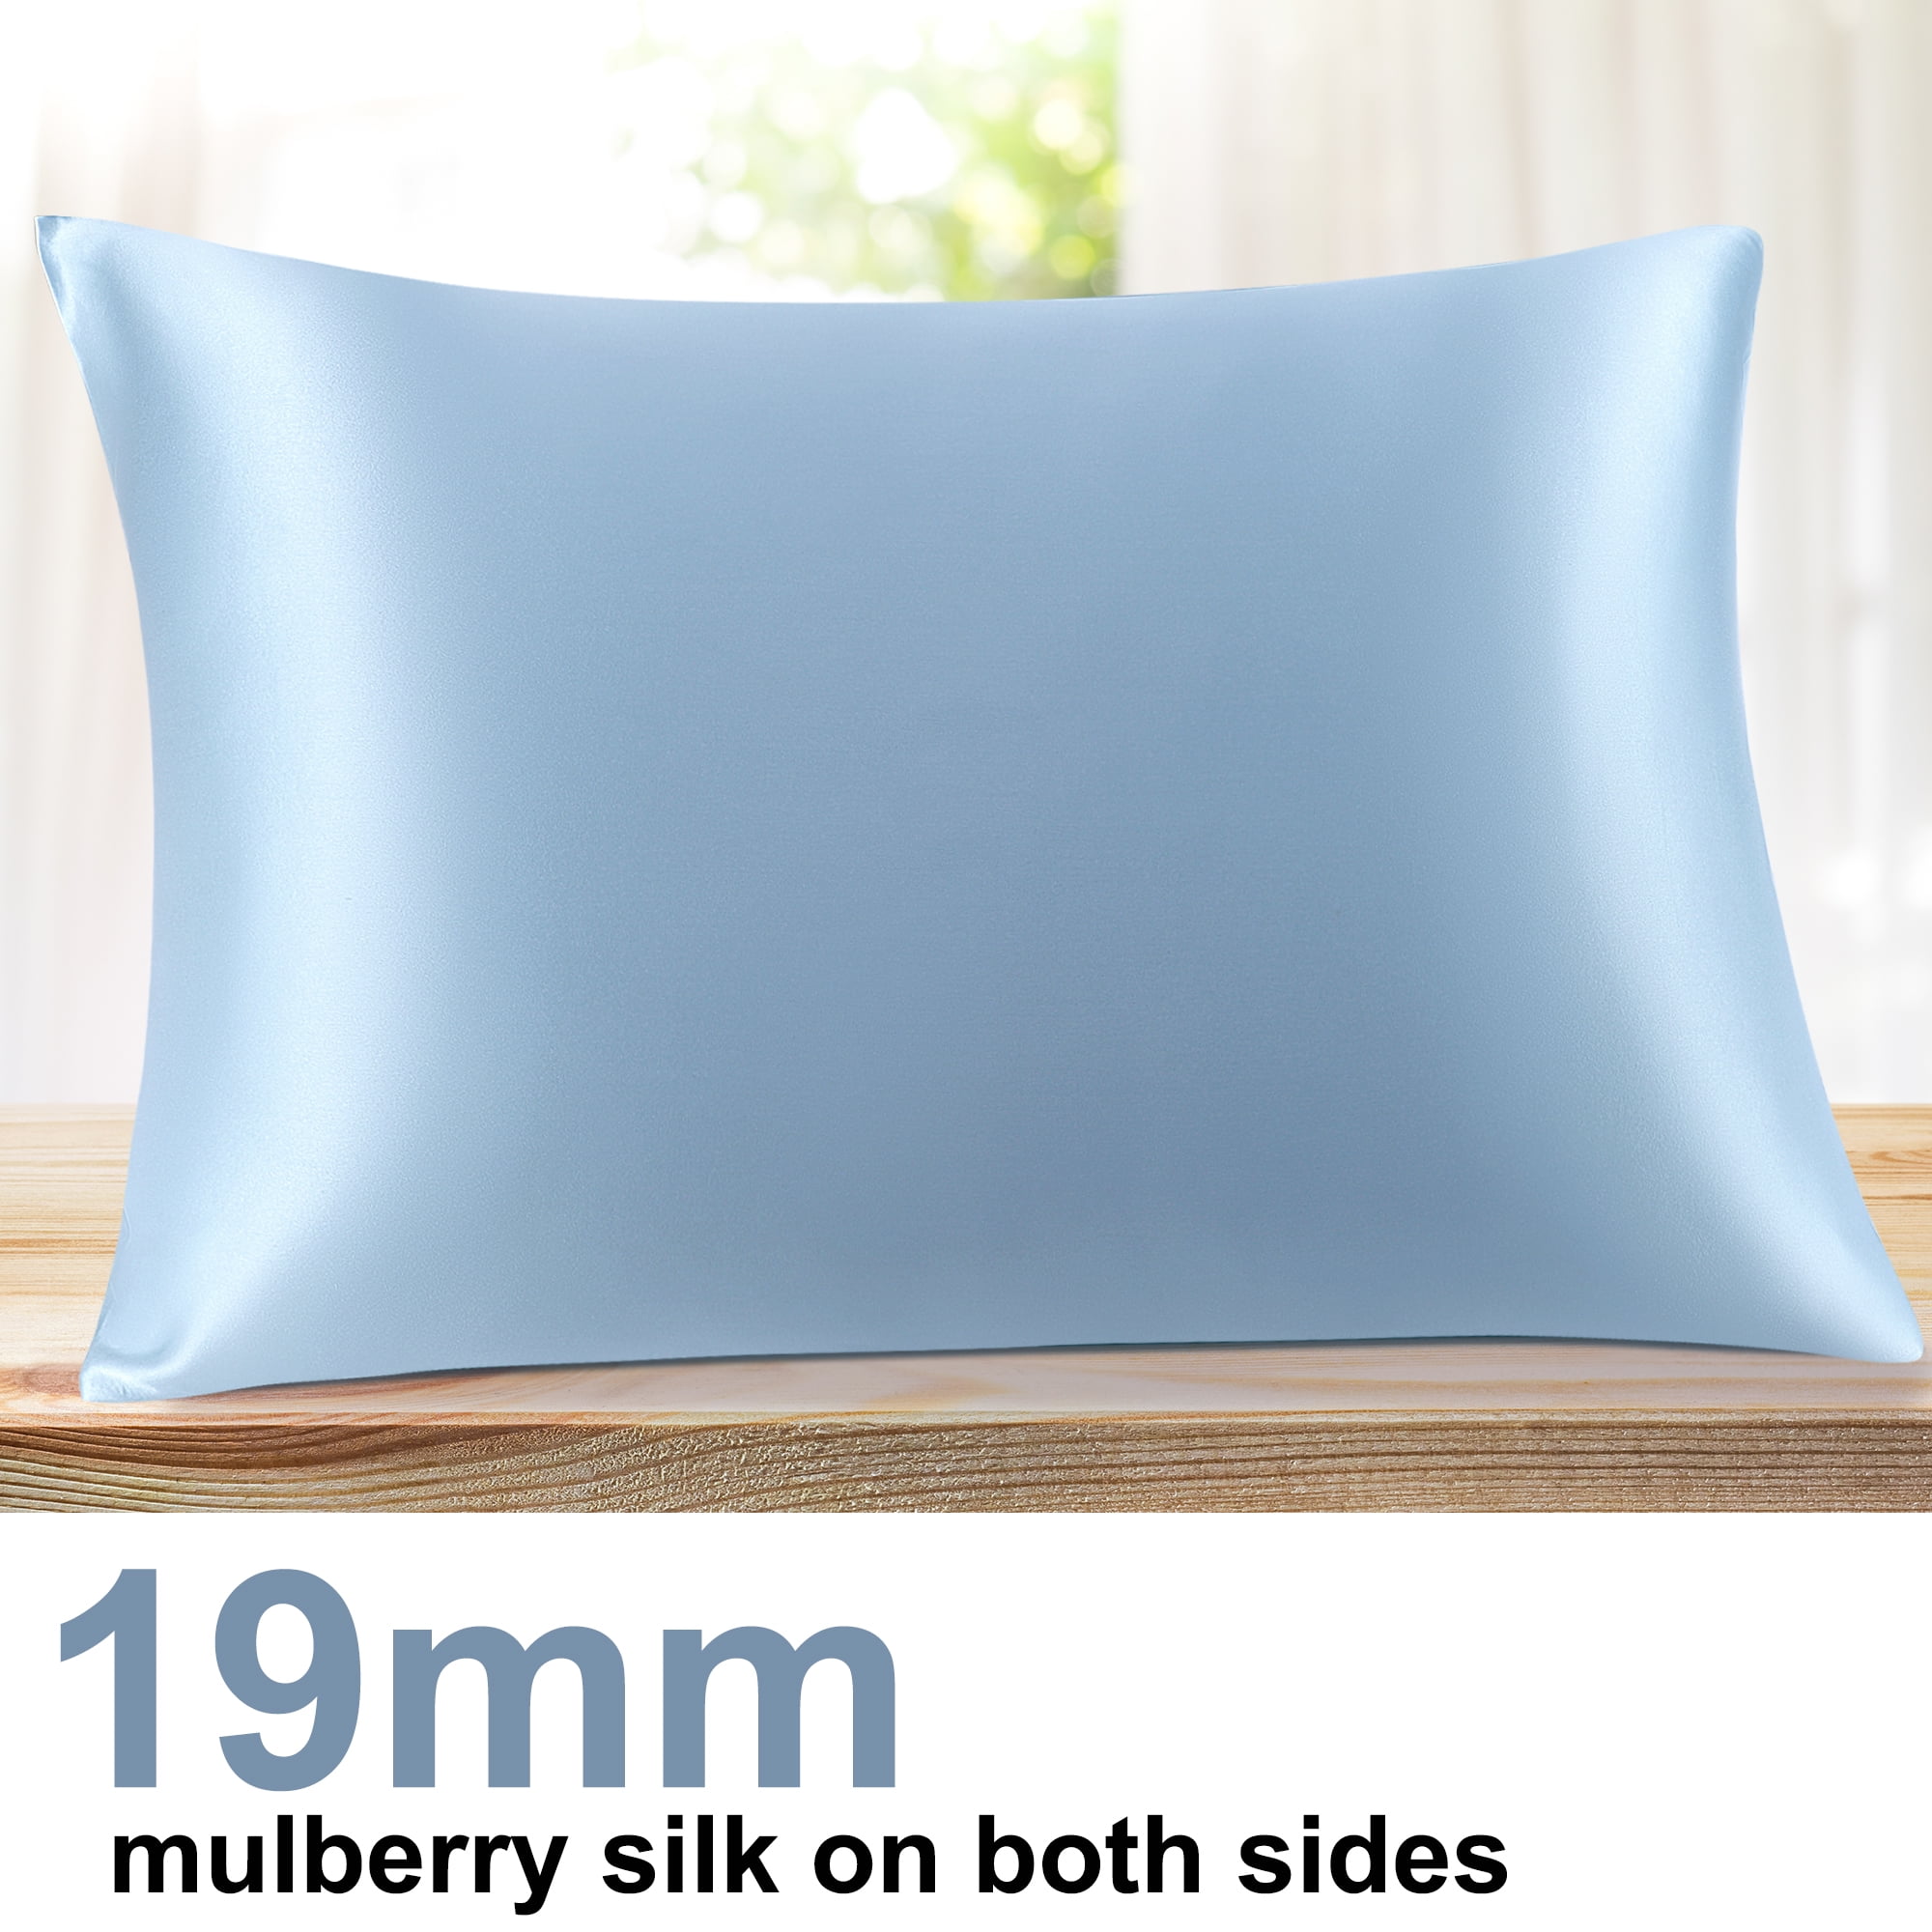 Details about   PiccoCasa 22 Momme Pure Silk Pillowcase Both Side 100% Queen King Standard 